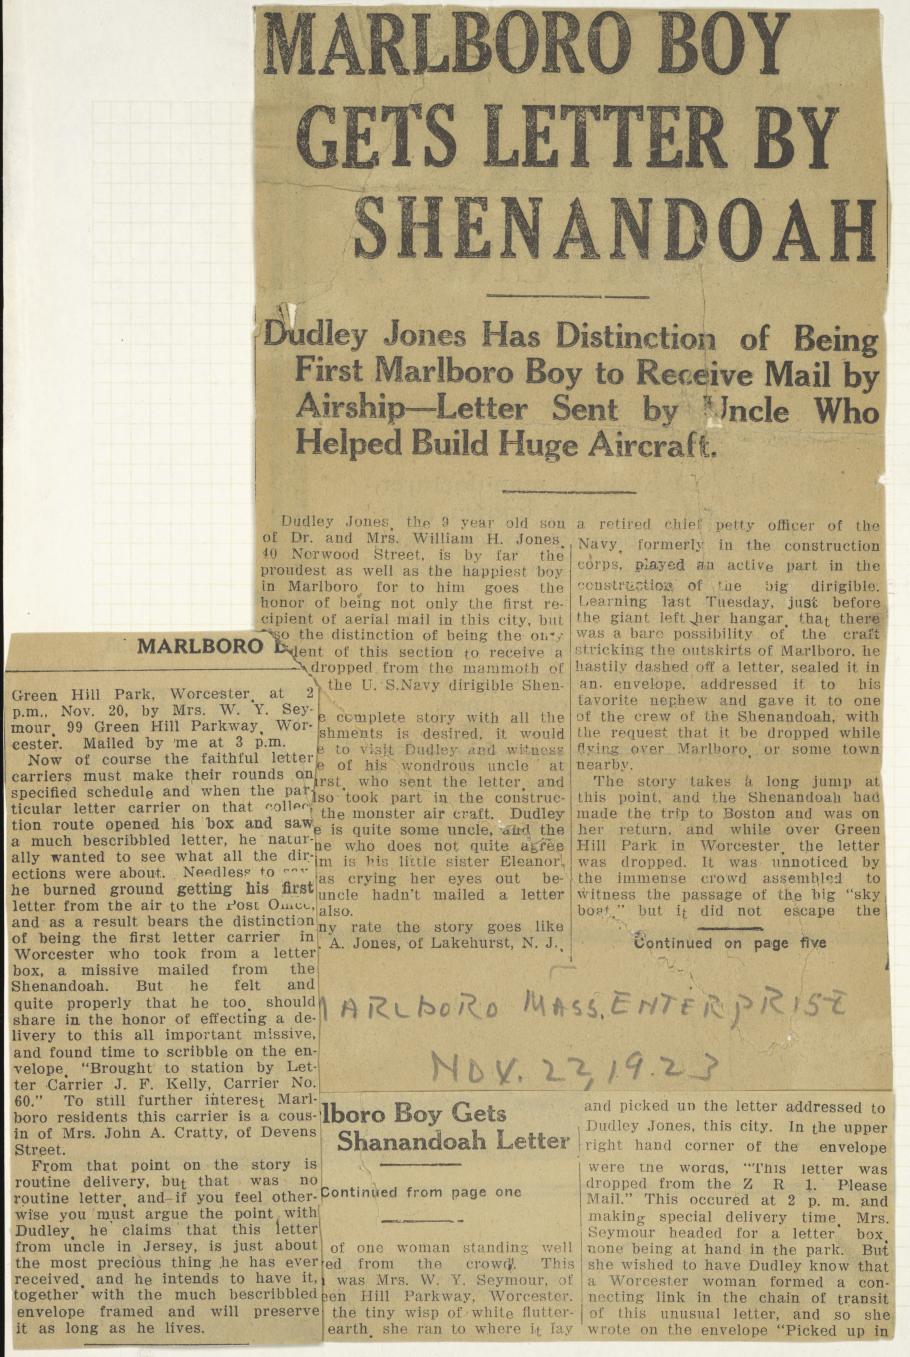 A clipped newspaper article that has been arranged so that it can be read on a single page. It includes a headline about Dudley Jones receiving mail dropped from the USS Shenandoah.